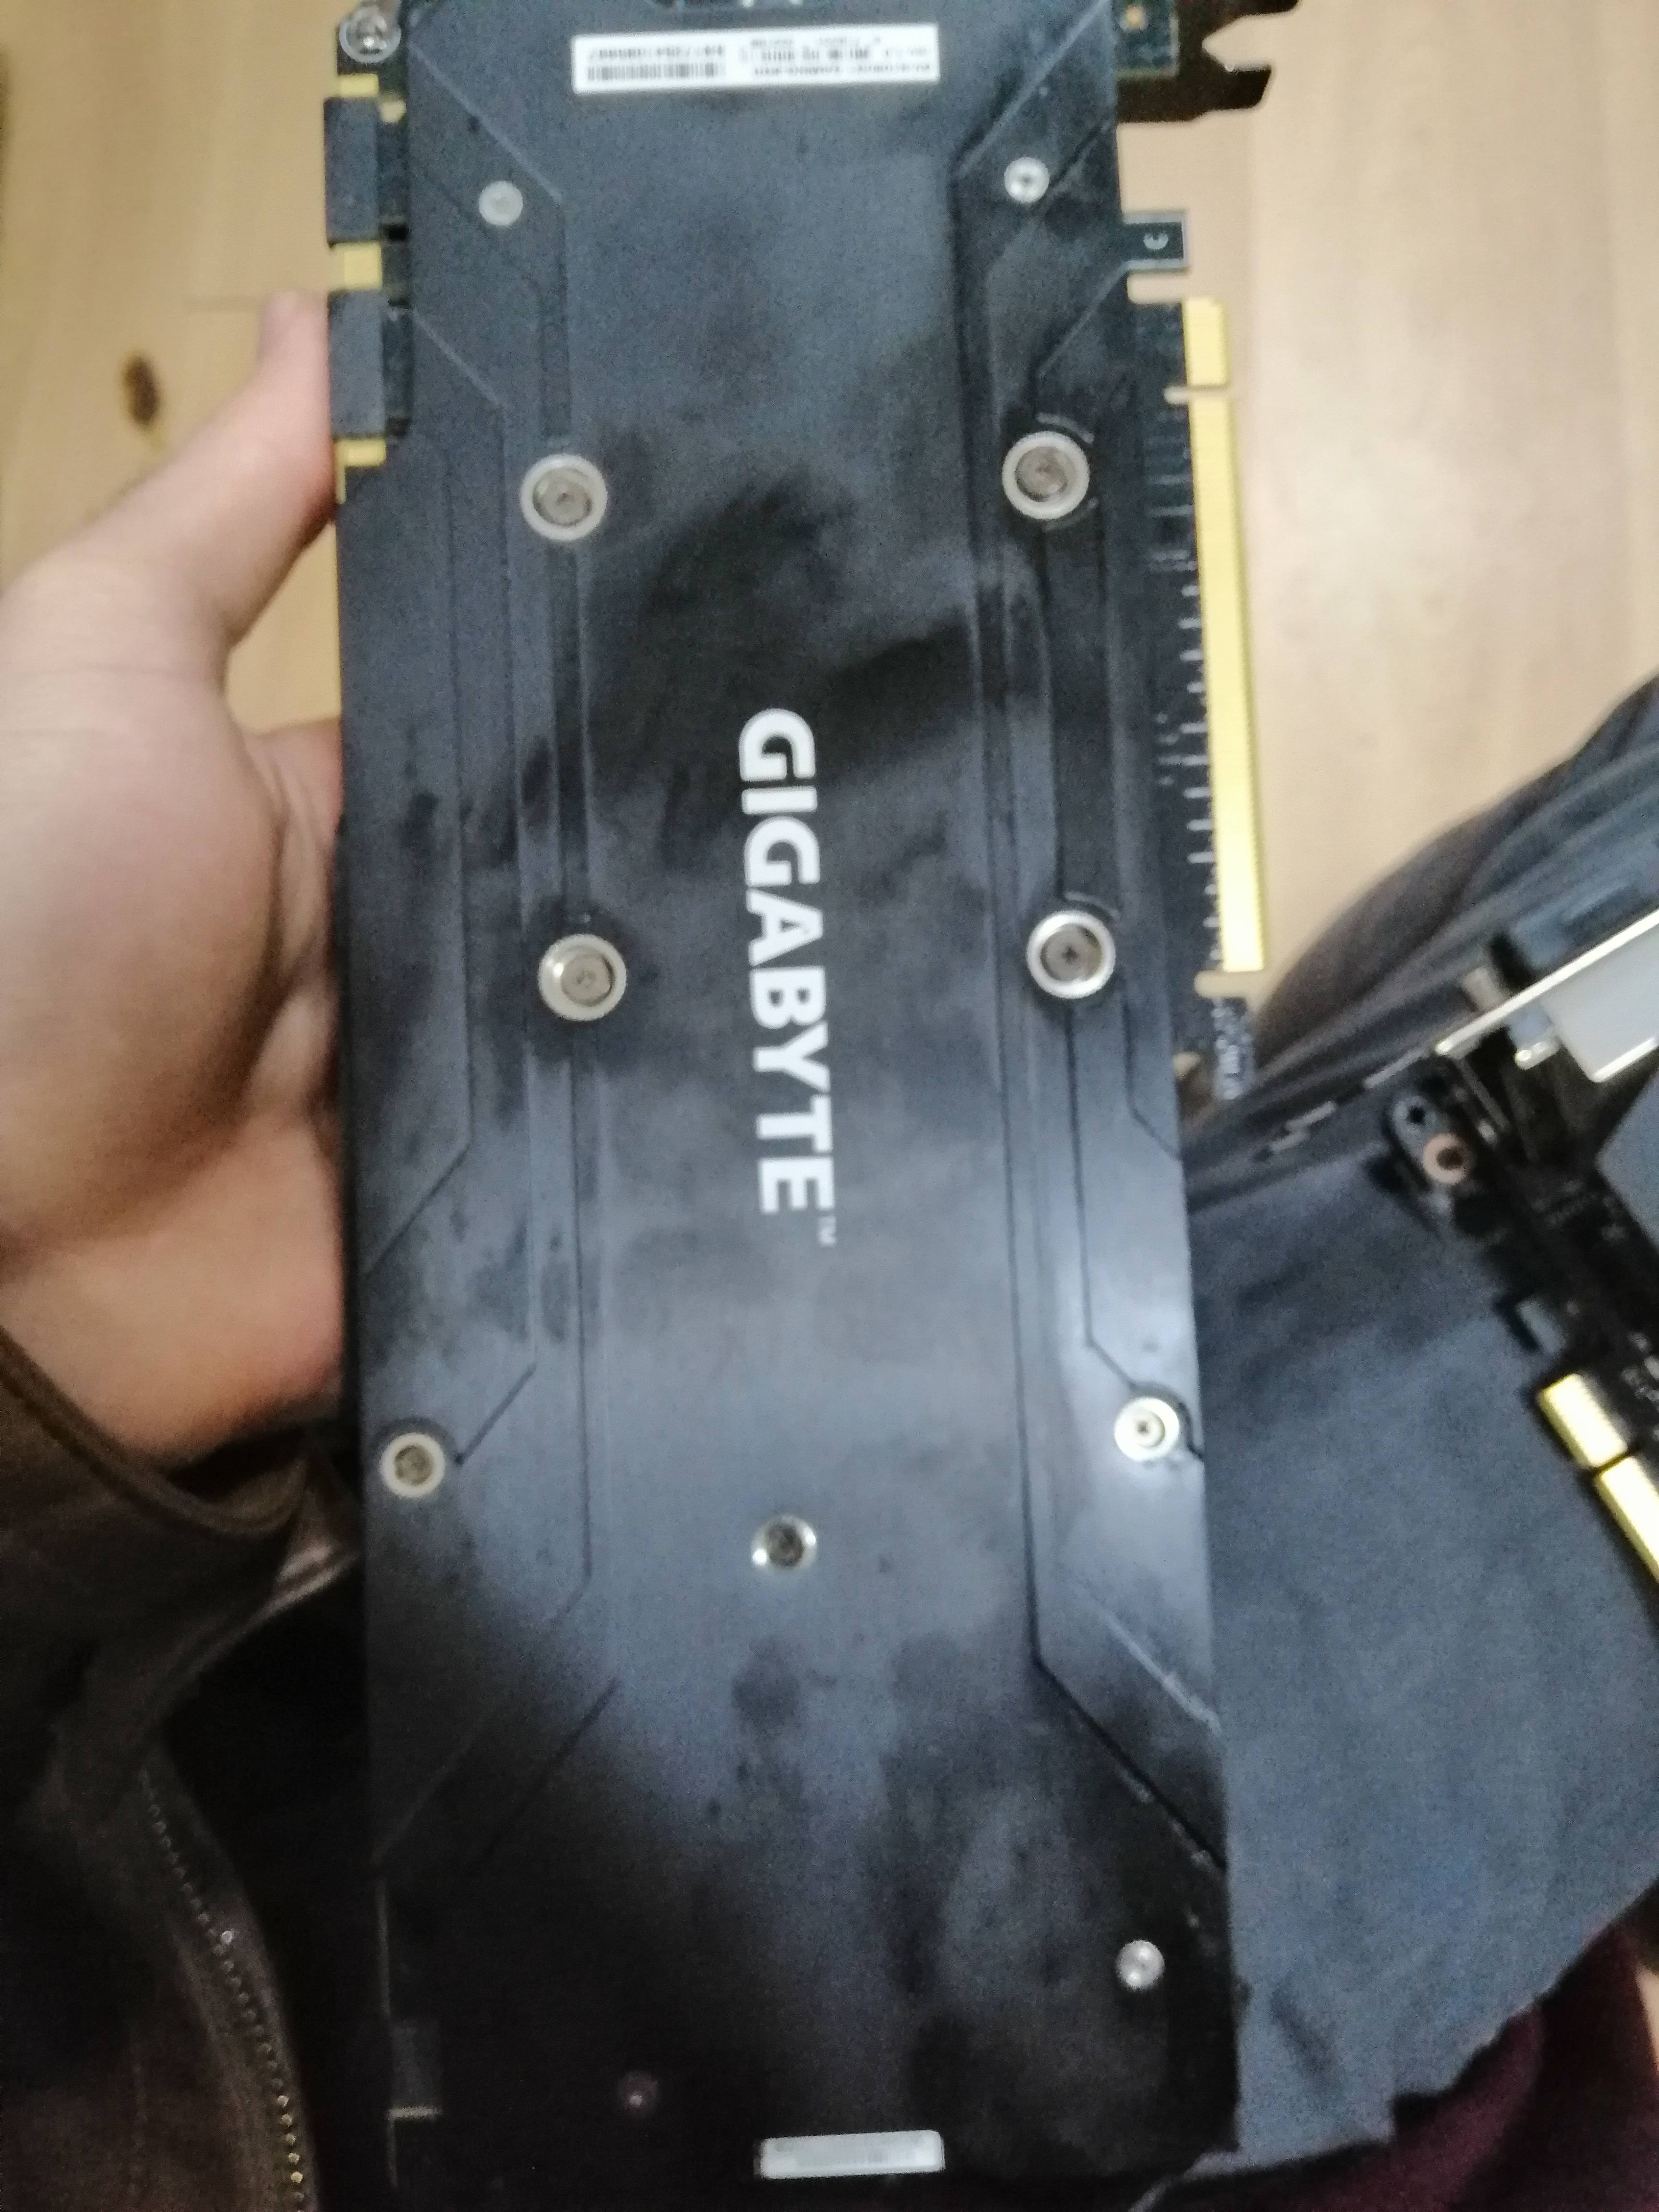 How to check gigabyte gpu if its opened. please - Graphics Cards - Linus Tech Tips